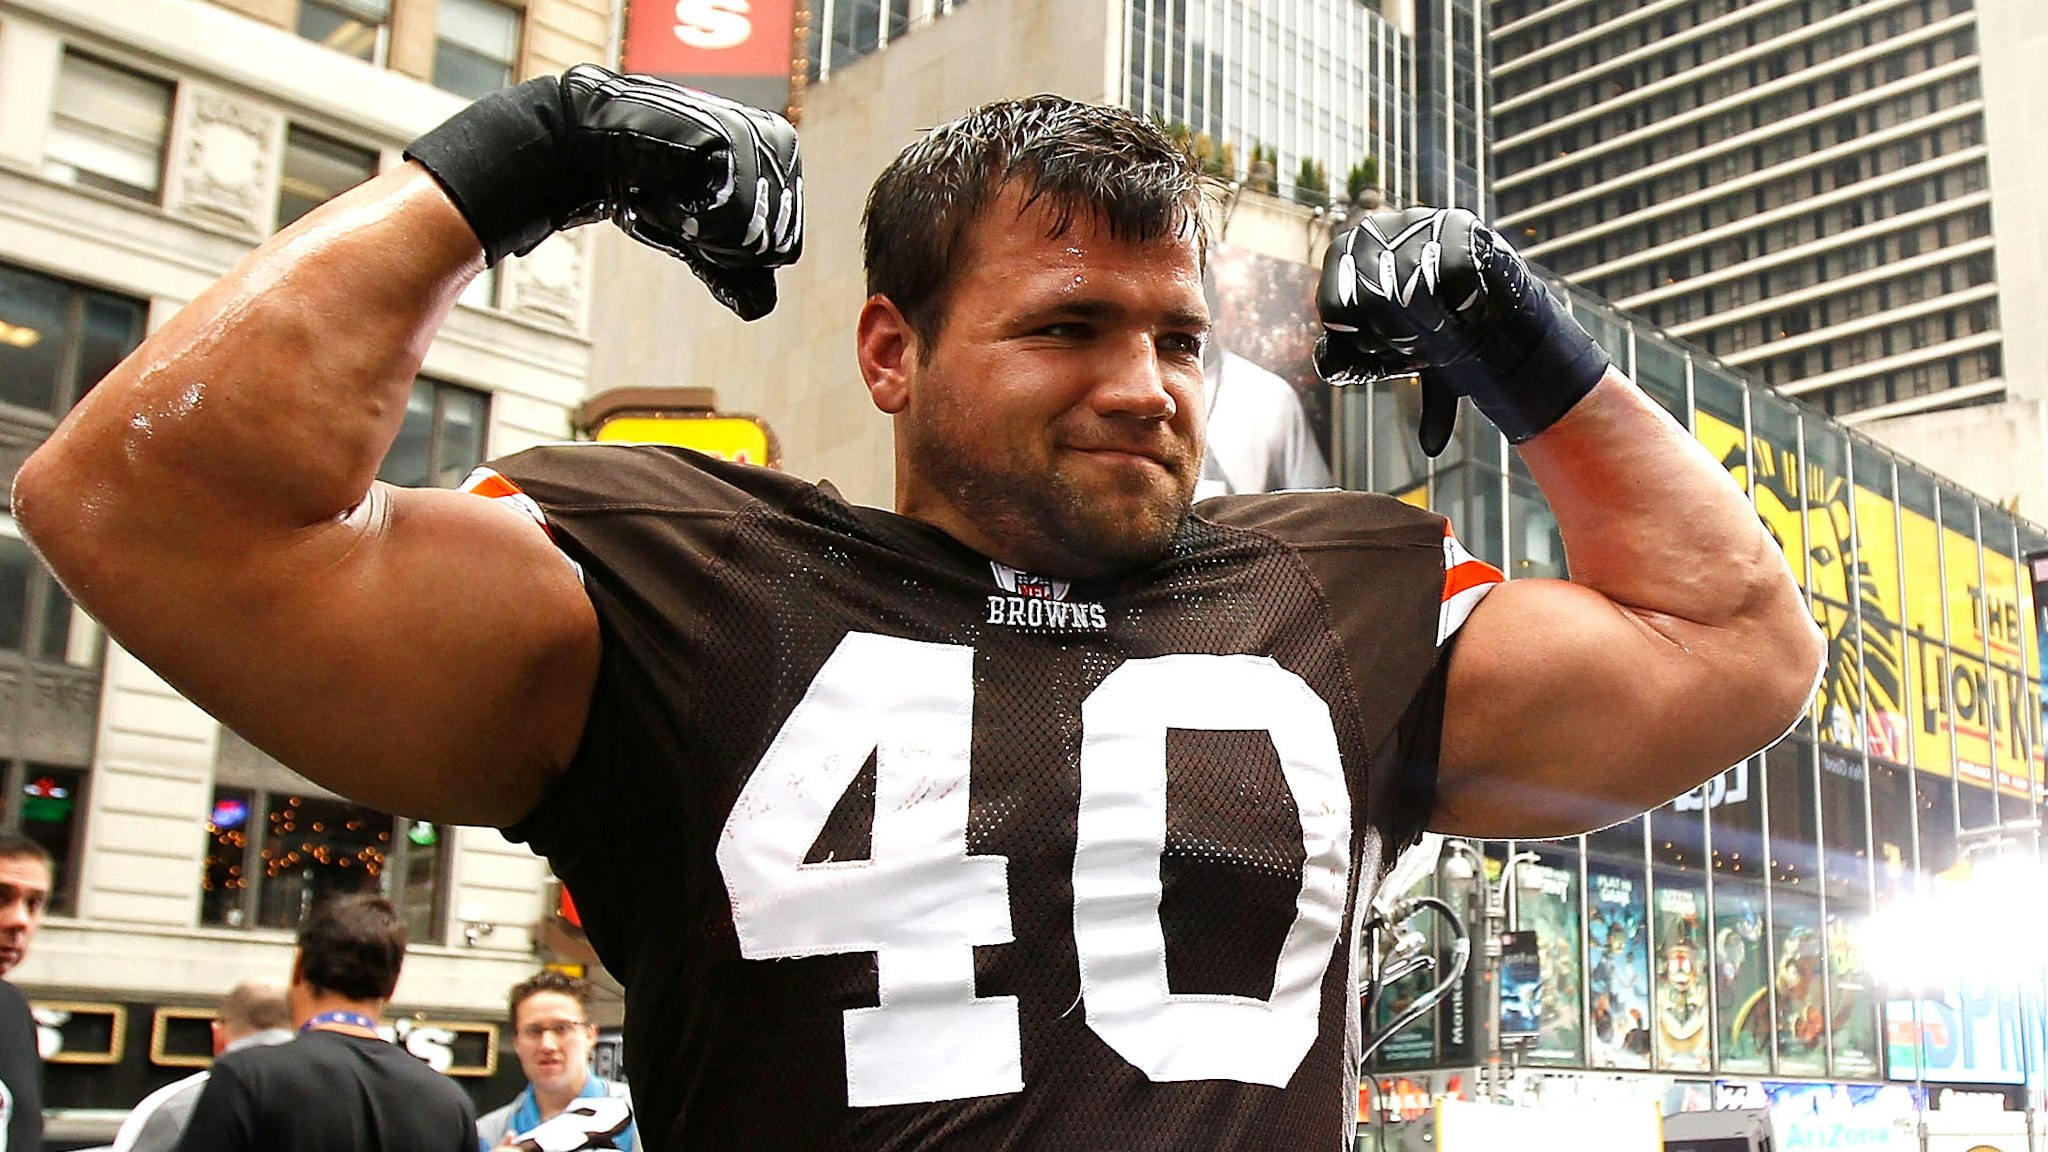 NEW YORK - APRIL 28: Peyton Hillis #40 of the Cleveland Browns participates in a photo shoot for the cover of EA Sports Madden NFL 12 on April 28, 2011 in Time Square, New York City